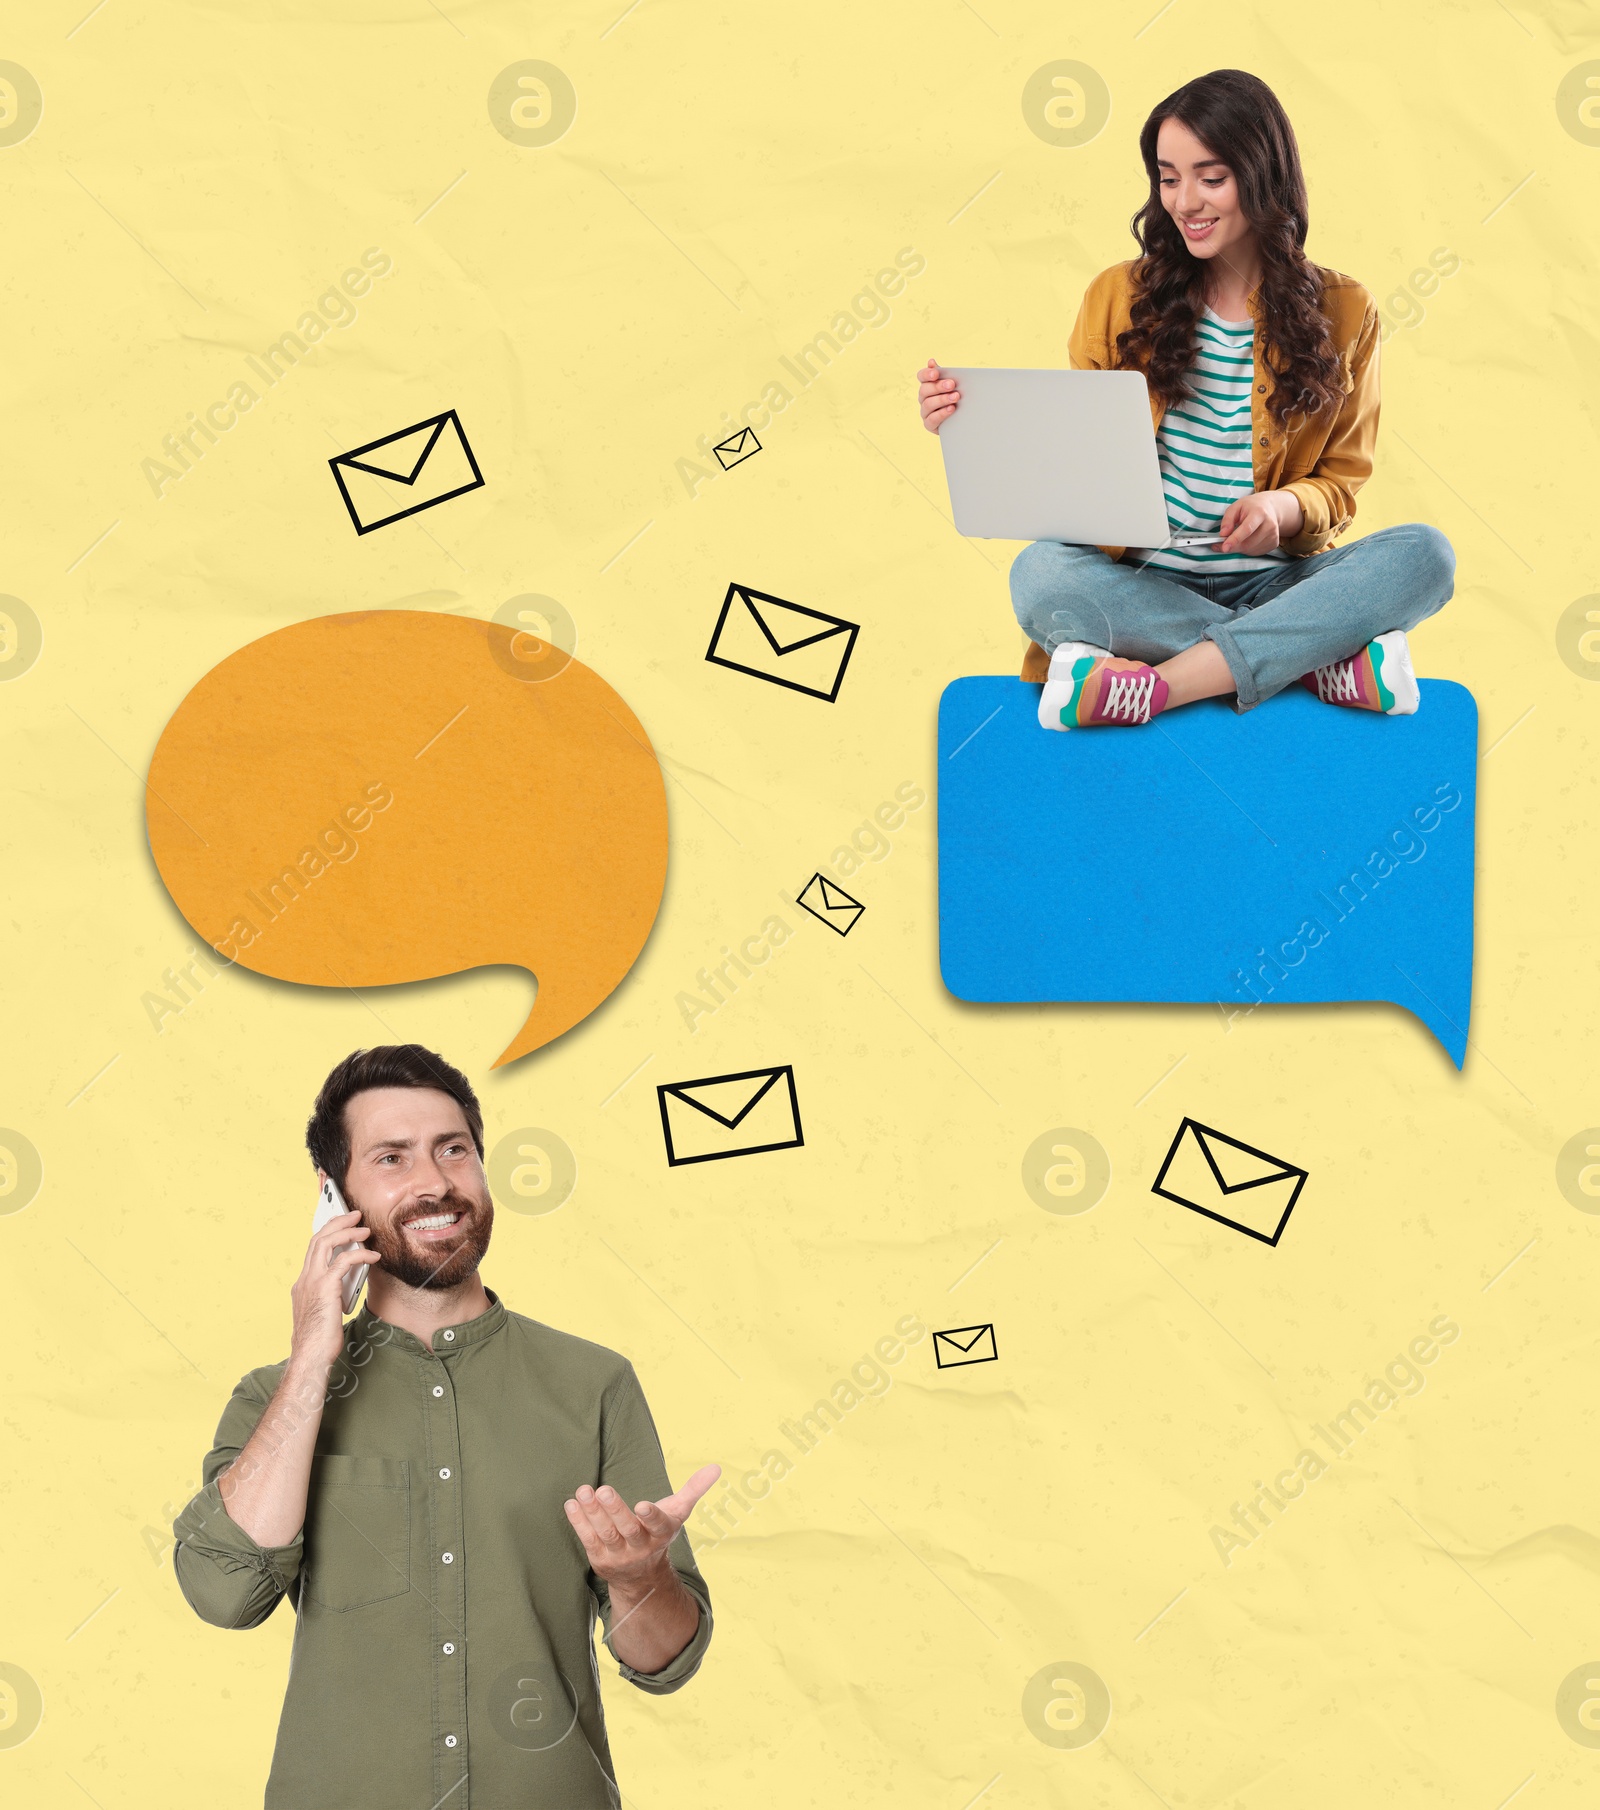 Image of Dialogue. Woman with laptop and man talking on mobile phone on color background. Speech bubbles and letter illustrations near them